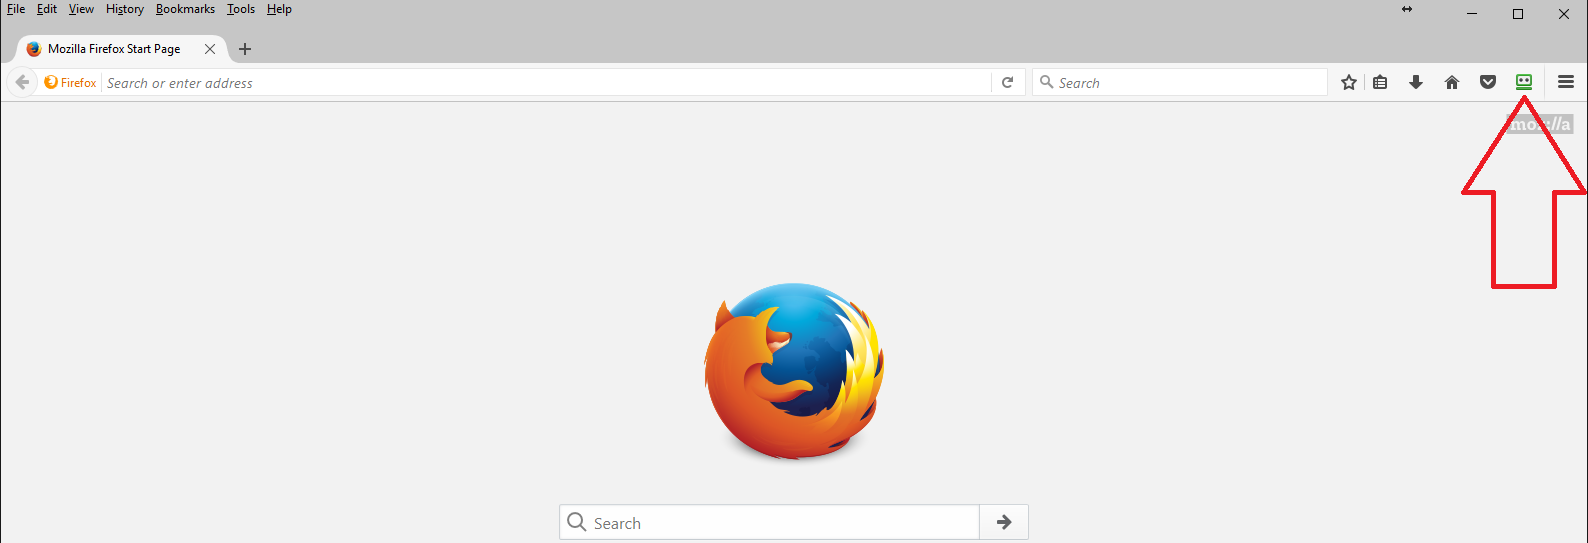 roboform for firefox android